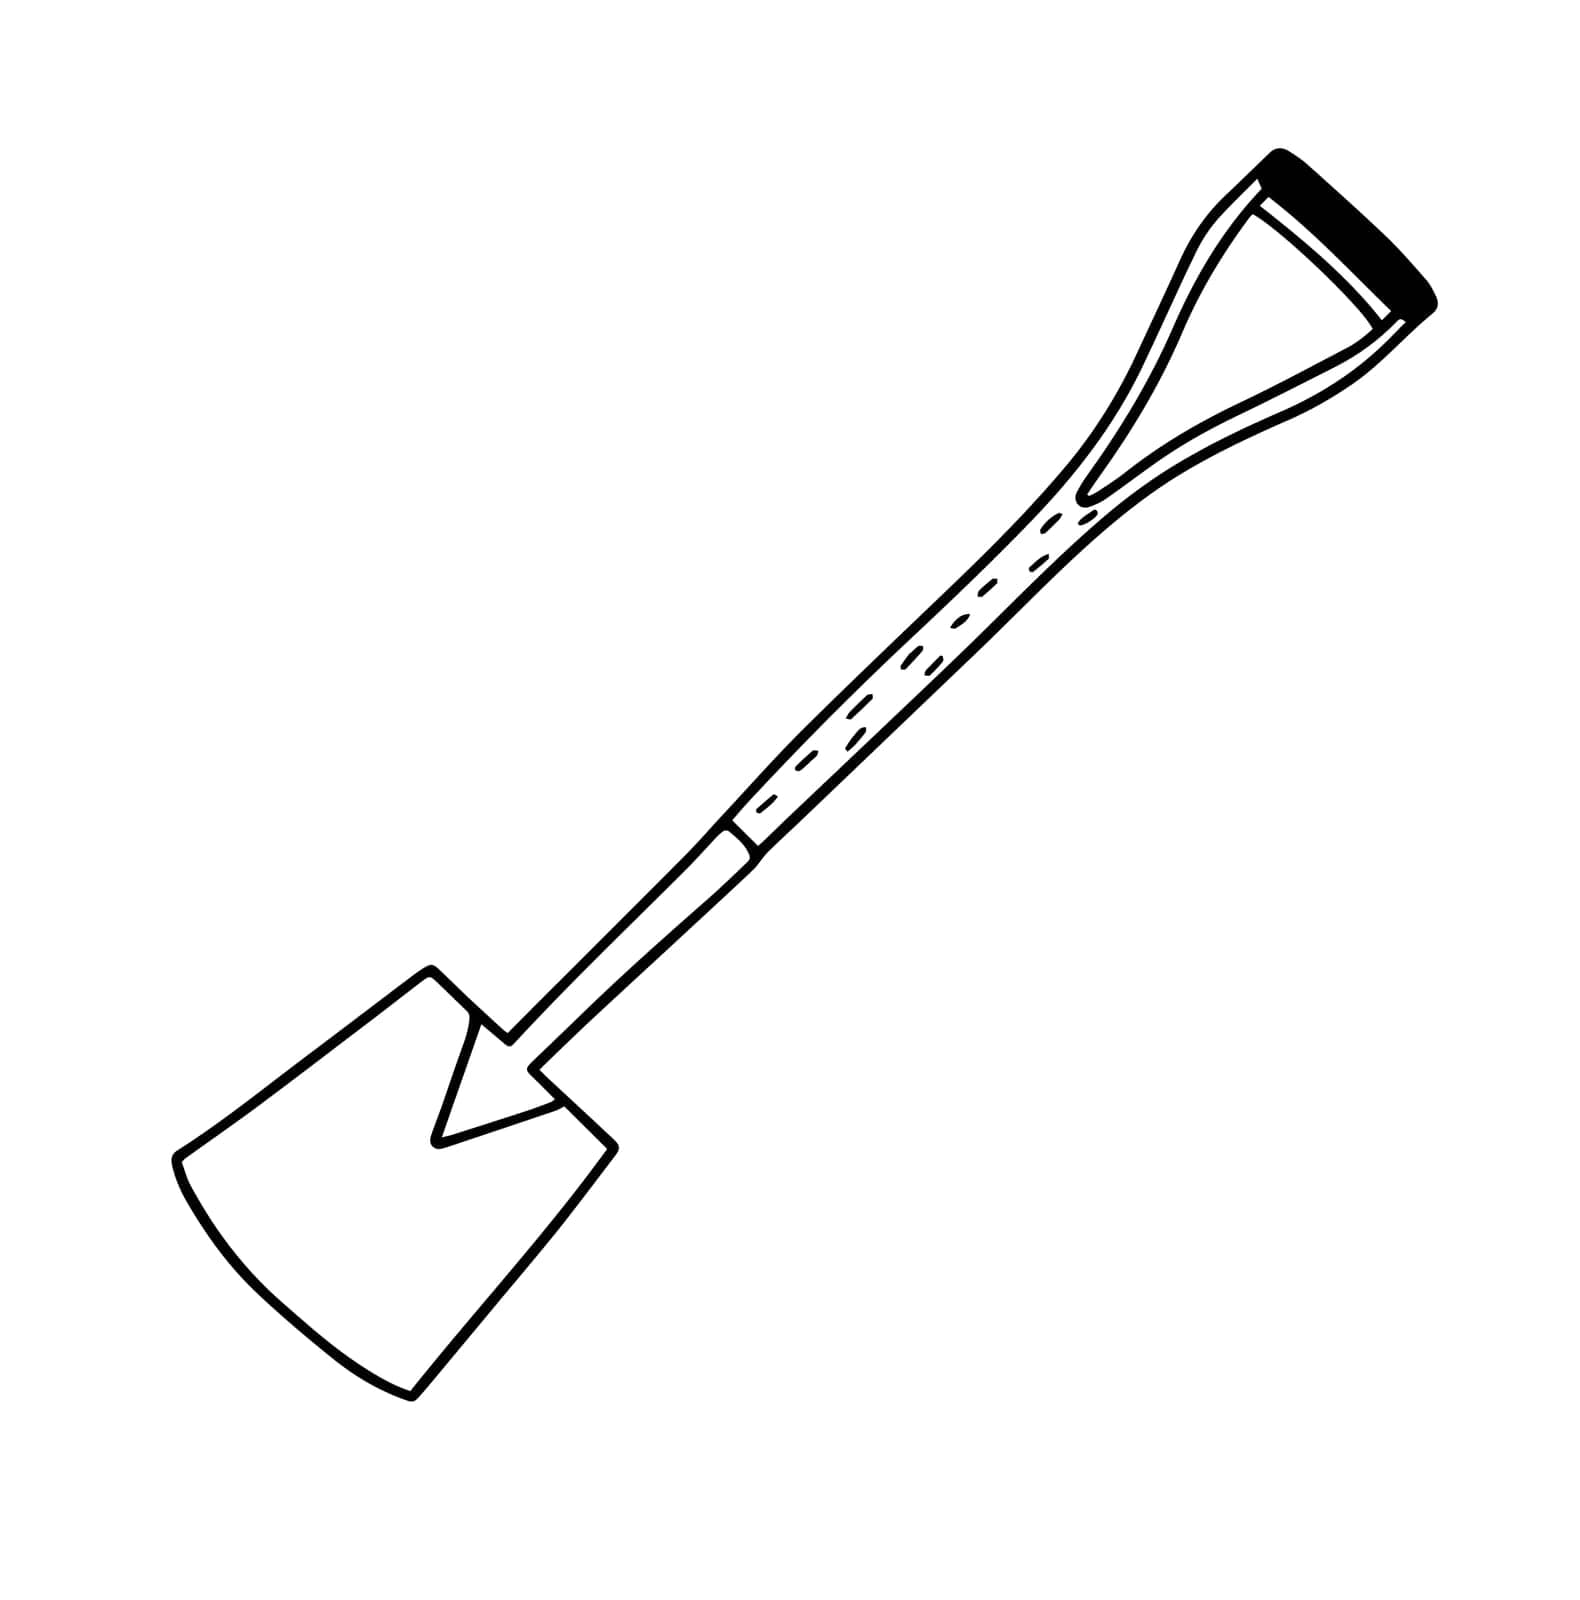 Shovel for earthworks.A tool for digging by Dustick